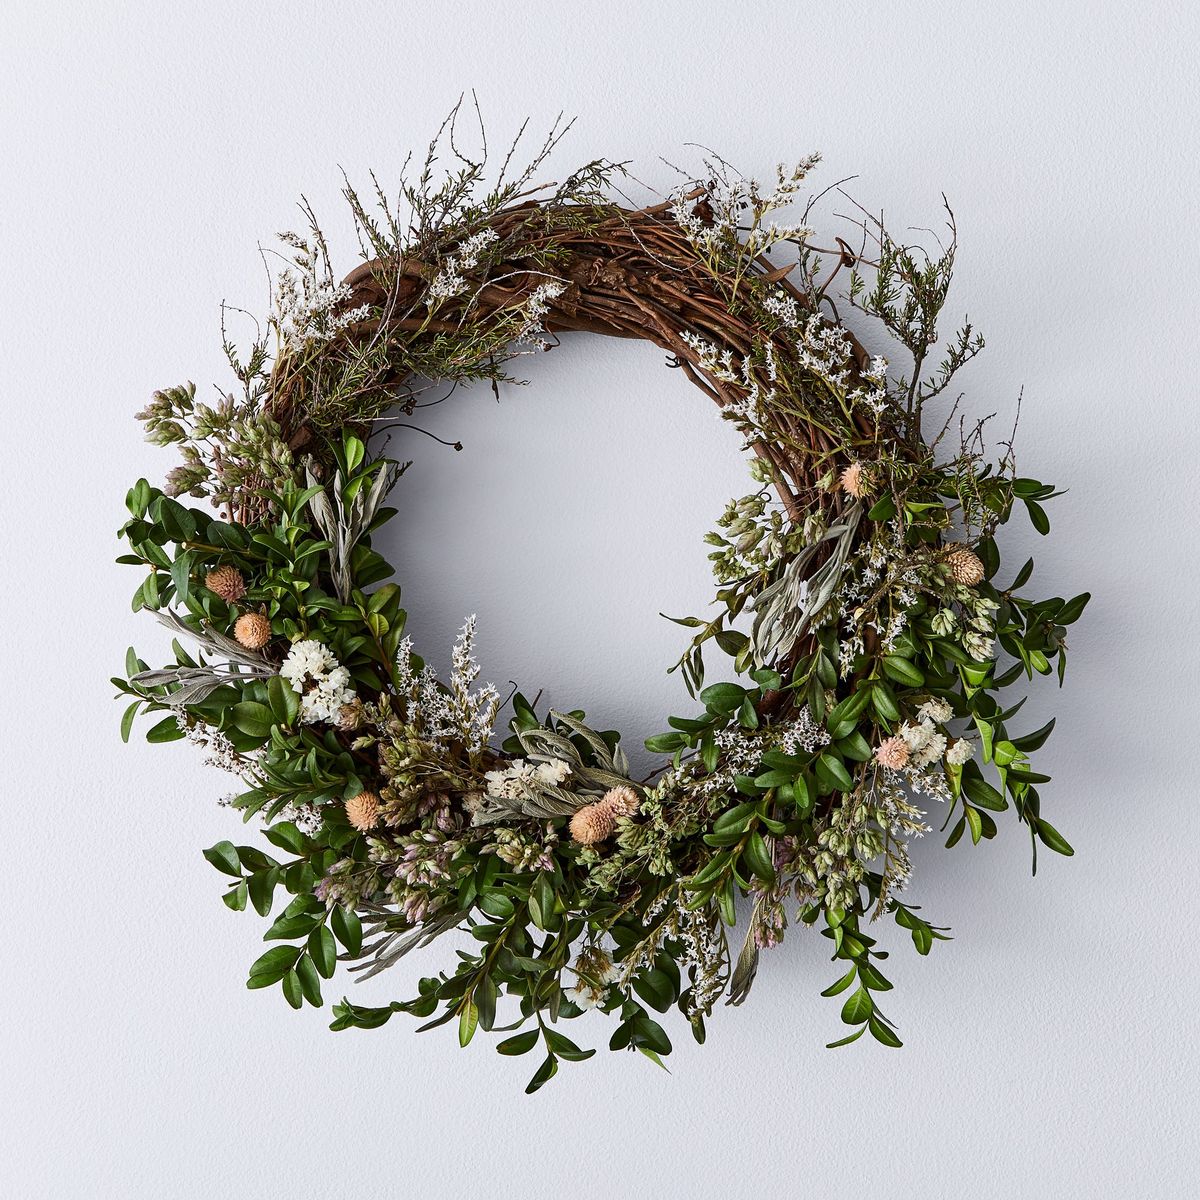 Can You Have a Wreath on Your Door All Year Round? Your Guide